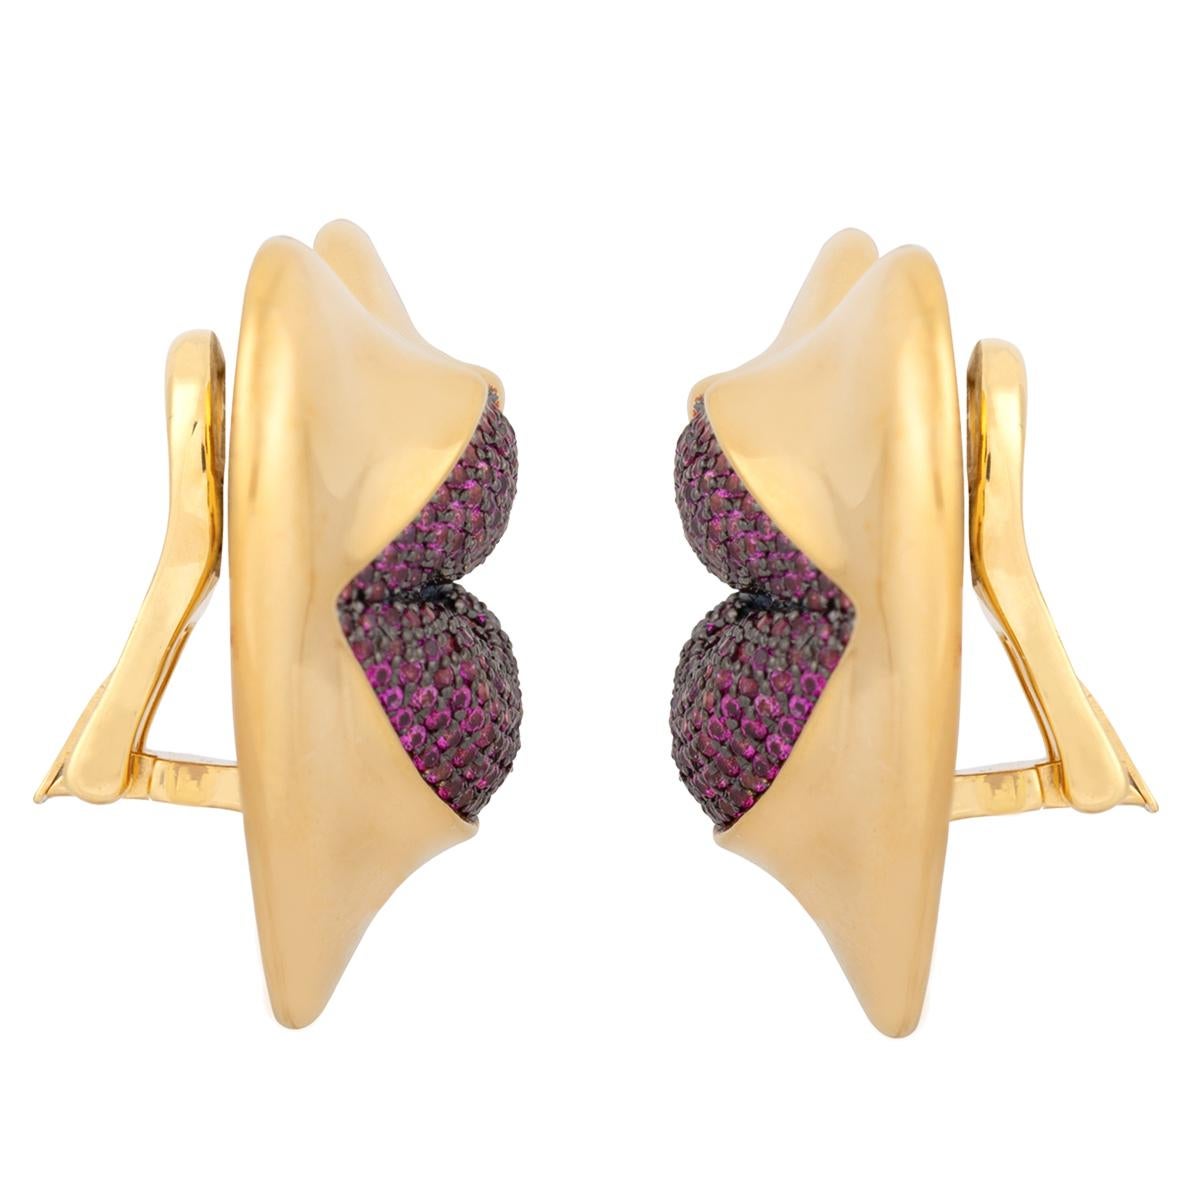 Love Lips Statement clip on earrings with all hand set red crystals, sparkle like ruby. Show your color of love!

PRODUCT DETAILS:
Composition: 925 Sterling Silver, 18k gold (thick 1 micron coat of 18k yellow gold on a solid sterling silver base)